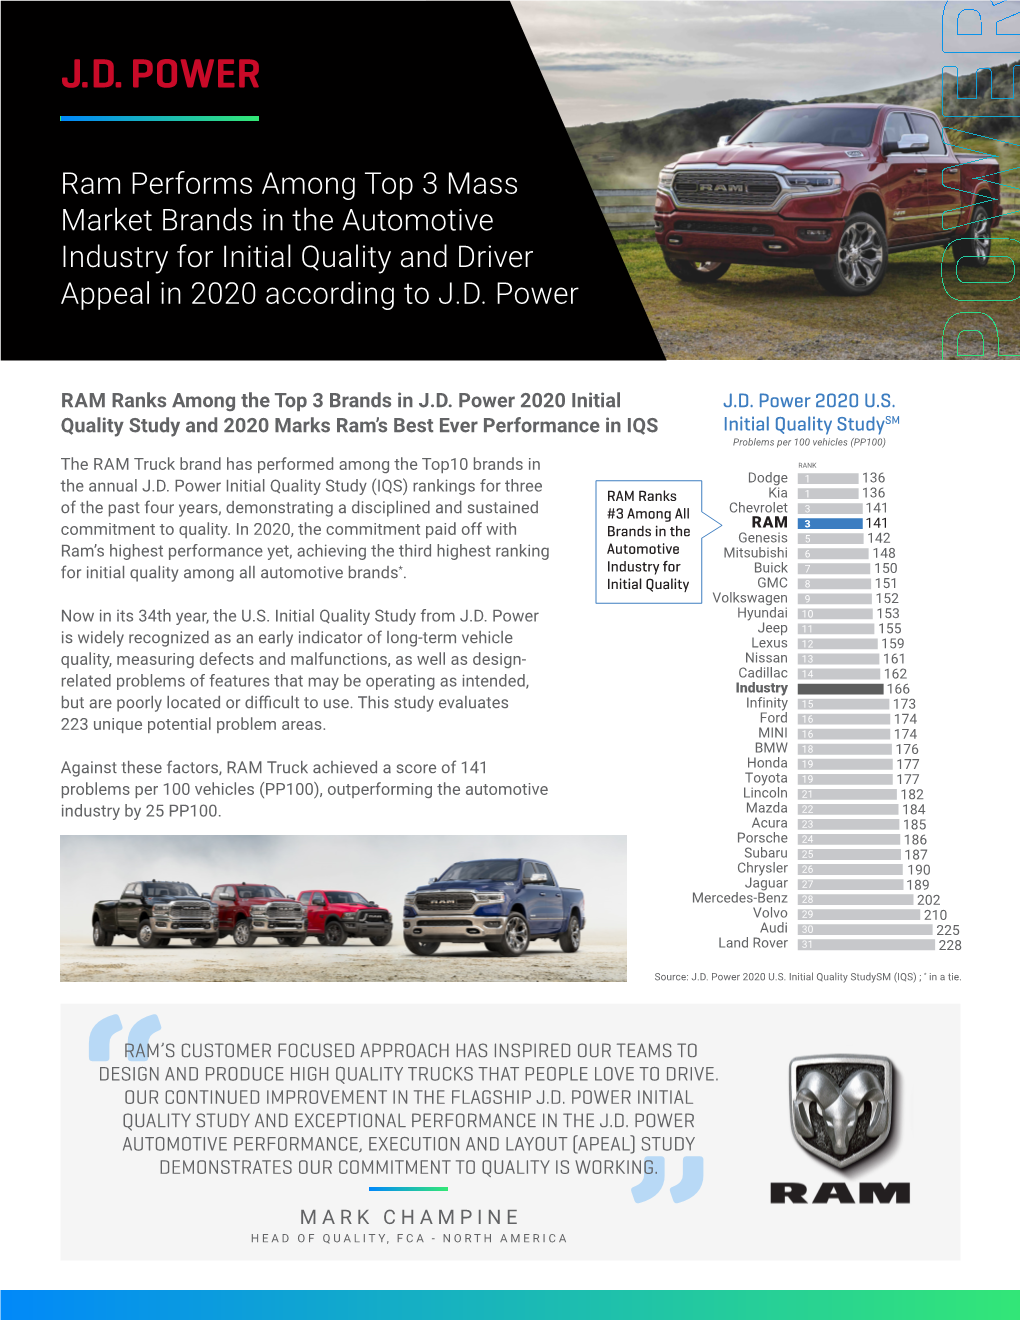 Ram Performs Among Top 3 Mass Market Brands in the Automotive Industry for Initial Quality and Driver Appeal in 2020 According to J.D